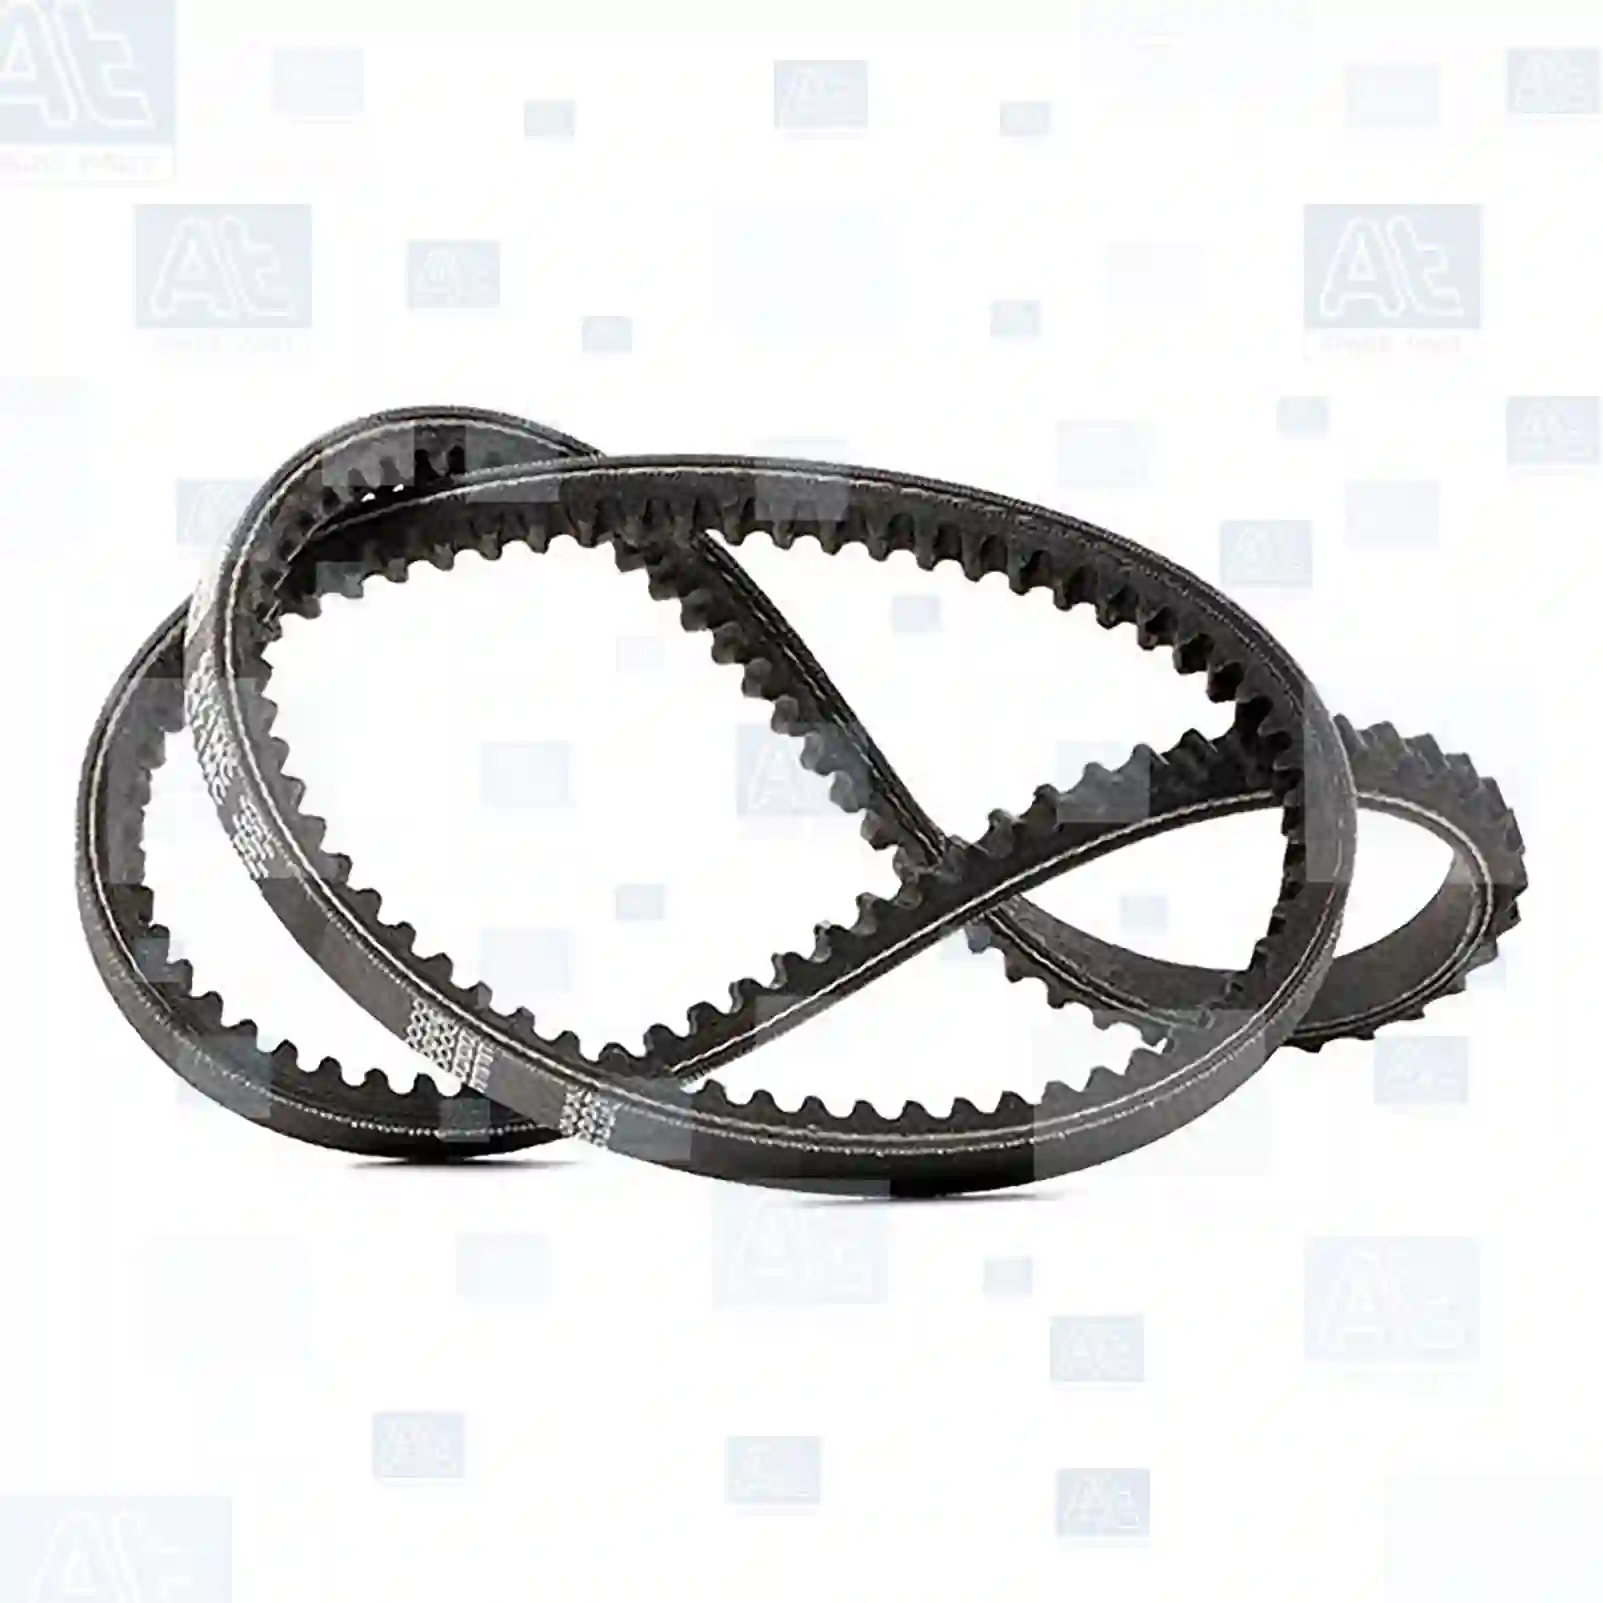 V-belt, at no 77707983, oem no: 195152320301, 5641010300, 60534343, 7135386, 11231717016, 9952150985, 1172069901, 1172069920, B0015396, 04483204, 6460679, 31110-PA6-910, 38763-PA0-003, 38763-PA0-004, 38763-PA0-0040, 5-89770171-0, 8-97143724-0, 04645365, 04688856, 04688857, 04810785, 04814350, 4645365, 4660360, 4660361, 4688856, 4688857, 4810785, 4814350, 0069972692, 0099970292, 0099975292, 04688856, 04688857, 11720-69900, 11720-69901, 11720-69910, 11720-69920, 11720-89910, 21067-10800, 0023245089, 0023255089, 5000034802, 5000043148, 5000043631, 5000044717, 5000048930, 833994, 0023245089, 0023255089, 5000034802, 5000043148, 5000043631, 5000044717, 5000048930, 90916-02162, 90916-02283, 99321-00985, 99321-50985, 99321-50995 At Spare Part | Engine, Accelerator Pedal, Camshaft, Connecting Rod, Crankcase, Crankshaft, Cylinder Head, Engine Suspension Mountings, Exhaust Manifold, Exhaust Gas Recirculation, Filter Kits, Flywheel Housing, General Overhaul Kits, Engine, Intake Manifold, Oil Cleaner, Oil Cooler, Oil Filter, Oil Pump, Oil Sump, Piston & Liner, Sensor & Switch, Timing Case, Turbocharger, Cooling System, Belt Tensioner, Coolant Filter, Coolant Pipe, Corrosion Prevention Agent, Drive, Expansion Tank, Fan, Intercooler, Monitors & Gauges, Radiator, Thermostat, V-Belt / Timing belt, Water Pump, Fuel System, Electronical Injector Unit, Feed Pump, Fuel Filter, cpl., Fuel Gauge Sender,  Fuel Line, Fuel Pump, Fuel Tank, Injection Line Kit, Injection Pump, Exhaust System, Clutch & Pedal, Gearbox, Propeller Shaft, Axles, Brake System, Hubs & Wheels, Suspension, Leaf Spring, Universal Parts / Accessories, Steering, Electrical System, Cabin V-belt, at no 77707983, oem no: 195152320301, 5641010300, 60534343, 7135386, 11231717016, 9952150985, 1172069901, 1172069920, B0015396, 04483204, 6460679, 31110-PA6-910, 38763-PA0-003, 38763-PA0-004, 38763-PA0-0040, 5-89770171-0, 8-97143724-0, 04645365, 04688856, 04688857, 04810785, 04814350, 4645365, 4660360, 4660361, 4688856, 4688857, 4810785, 4814350, 0069972692, 0099970292, 0099975292, 04688856, 04688857, 11720-69900, 11720-69901, 11720-69910, 11720-69920, 11720-89910, 21067-10800, 0023245089, 0023255089, 5000034802, 5000043148, 5000043631, 5000044717, 5000048930, 833994, 0023245089, 0023255089, 5000034802, 5000043148, 5000043631, 5000044717, 5000048930, 90916-02162, 90916-02283, 99321-00985, 99321-50985, 99321-50995 At Spare Part | Engine, Accelerator Pedal, Camshaft, Connecting Rod, Crankcase, Crankshaft, Cylinder Head, Engine Suspension Mountings, Exhaust Manifold, Exhaust Gas Recirculation, Filter Kits, Flywheel Housing, General Overhaul Kits, Engine, Intake Manifold, Oil Cleaner, Oil Cooler, Oil Filter, Oil Pump, Oil Sump, Piston & Liner, Sensor & Switch, Timing Case, Turbocharger, Cooling System, Belt Tensioner, Coolant Filter, Coolant Pipe, Corrosion Prevention Agent, Drive, Expansion Tank, Fan, Intercooler, Monitors & Gauges, Radiator, Thermostat, V-Belt / Timing belt, Water Pump, Fuel System, Electronical Injector Unit, Feed Pump, Fuel Filter, cpl., Fuel Gauge Sender,  Fuel Line, Fuel Pump, Fuel Tank, Injection Line Kit, Injection Pump, Exhaust System, Clutch & Pedal, Gearbox, Propeller Shaft, Axles, Brake System, Hubs & Wheels, Suspension, Leaf Spring, Universal Parts / Accessories, Steering, Electrical System, Cabin